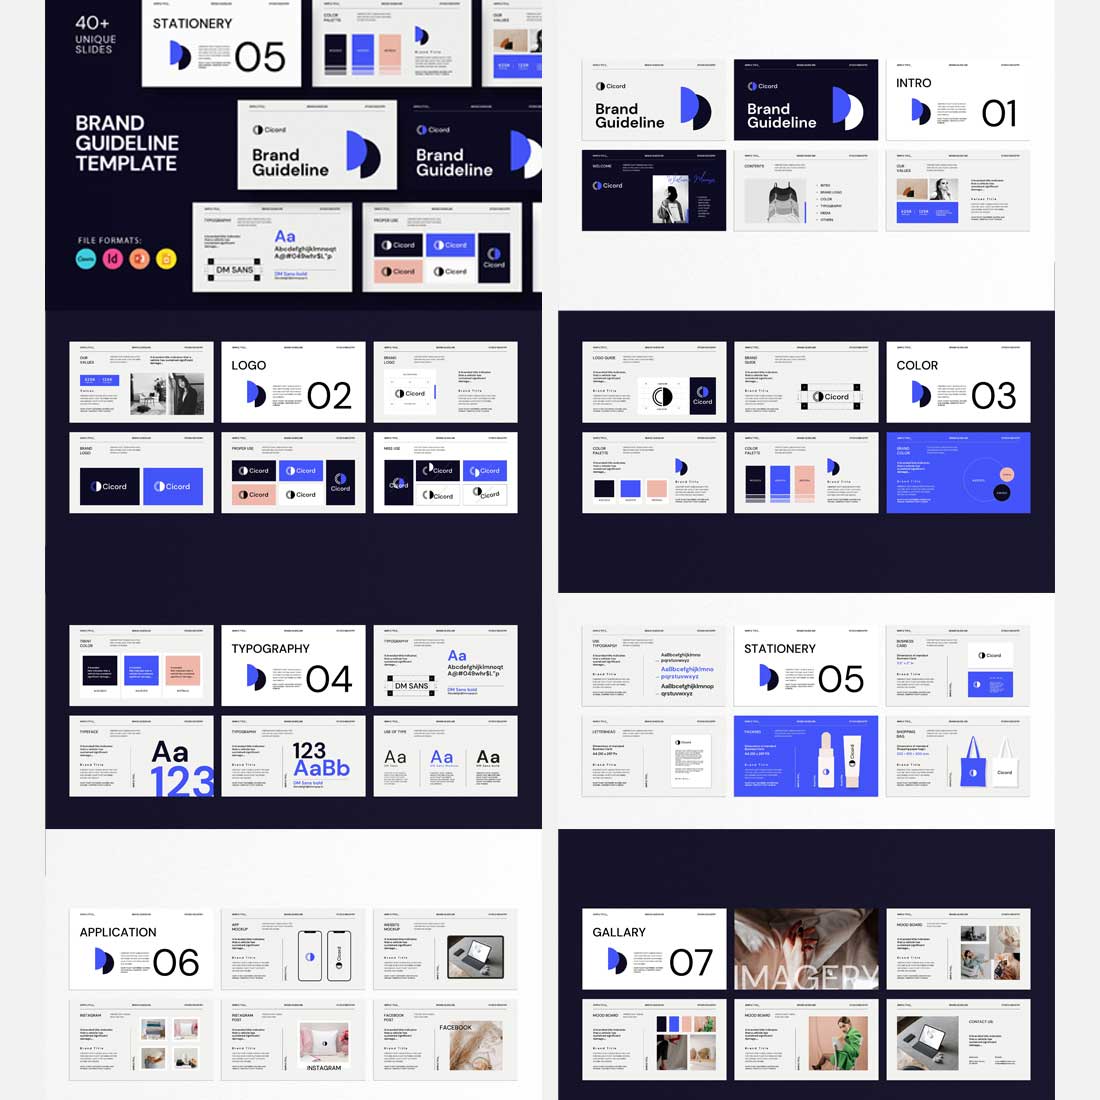 00 brand guideline template 542